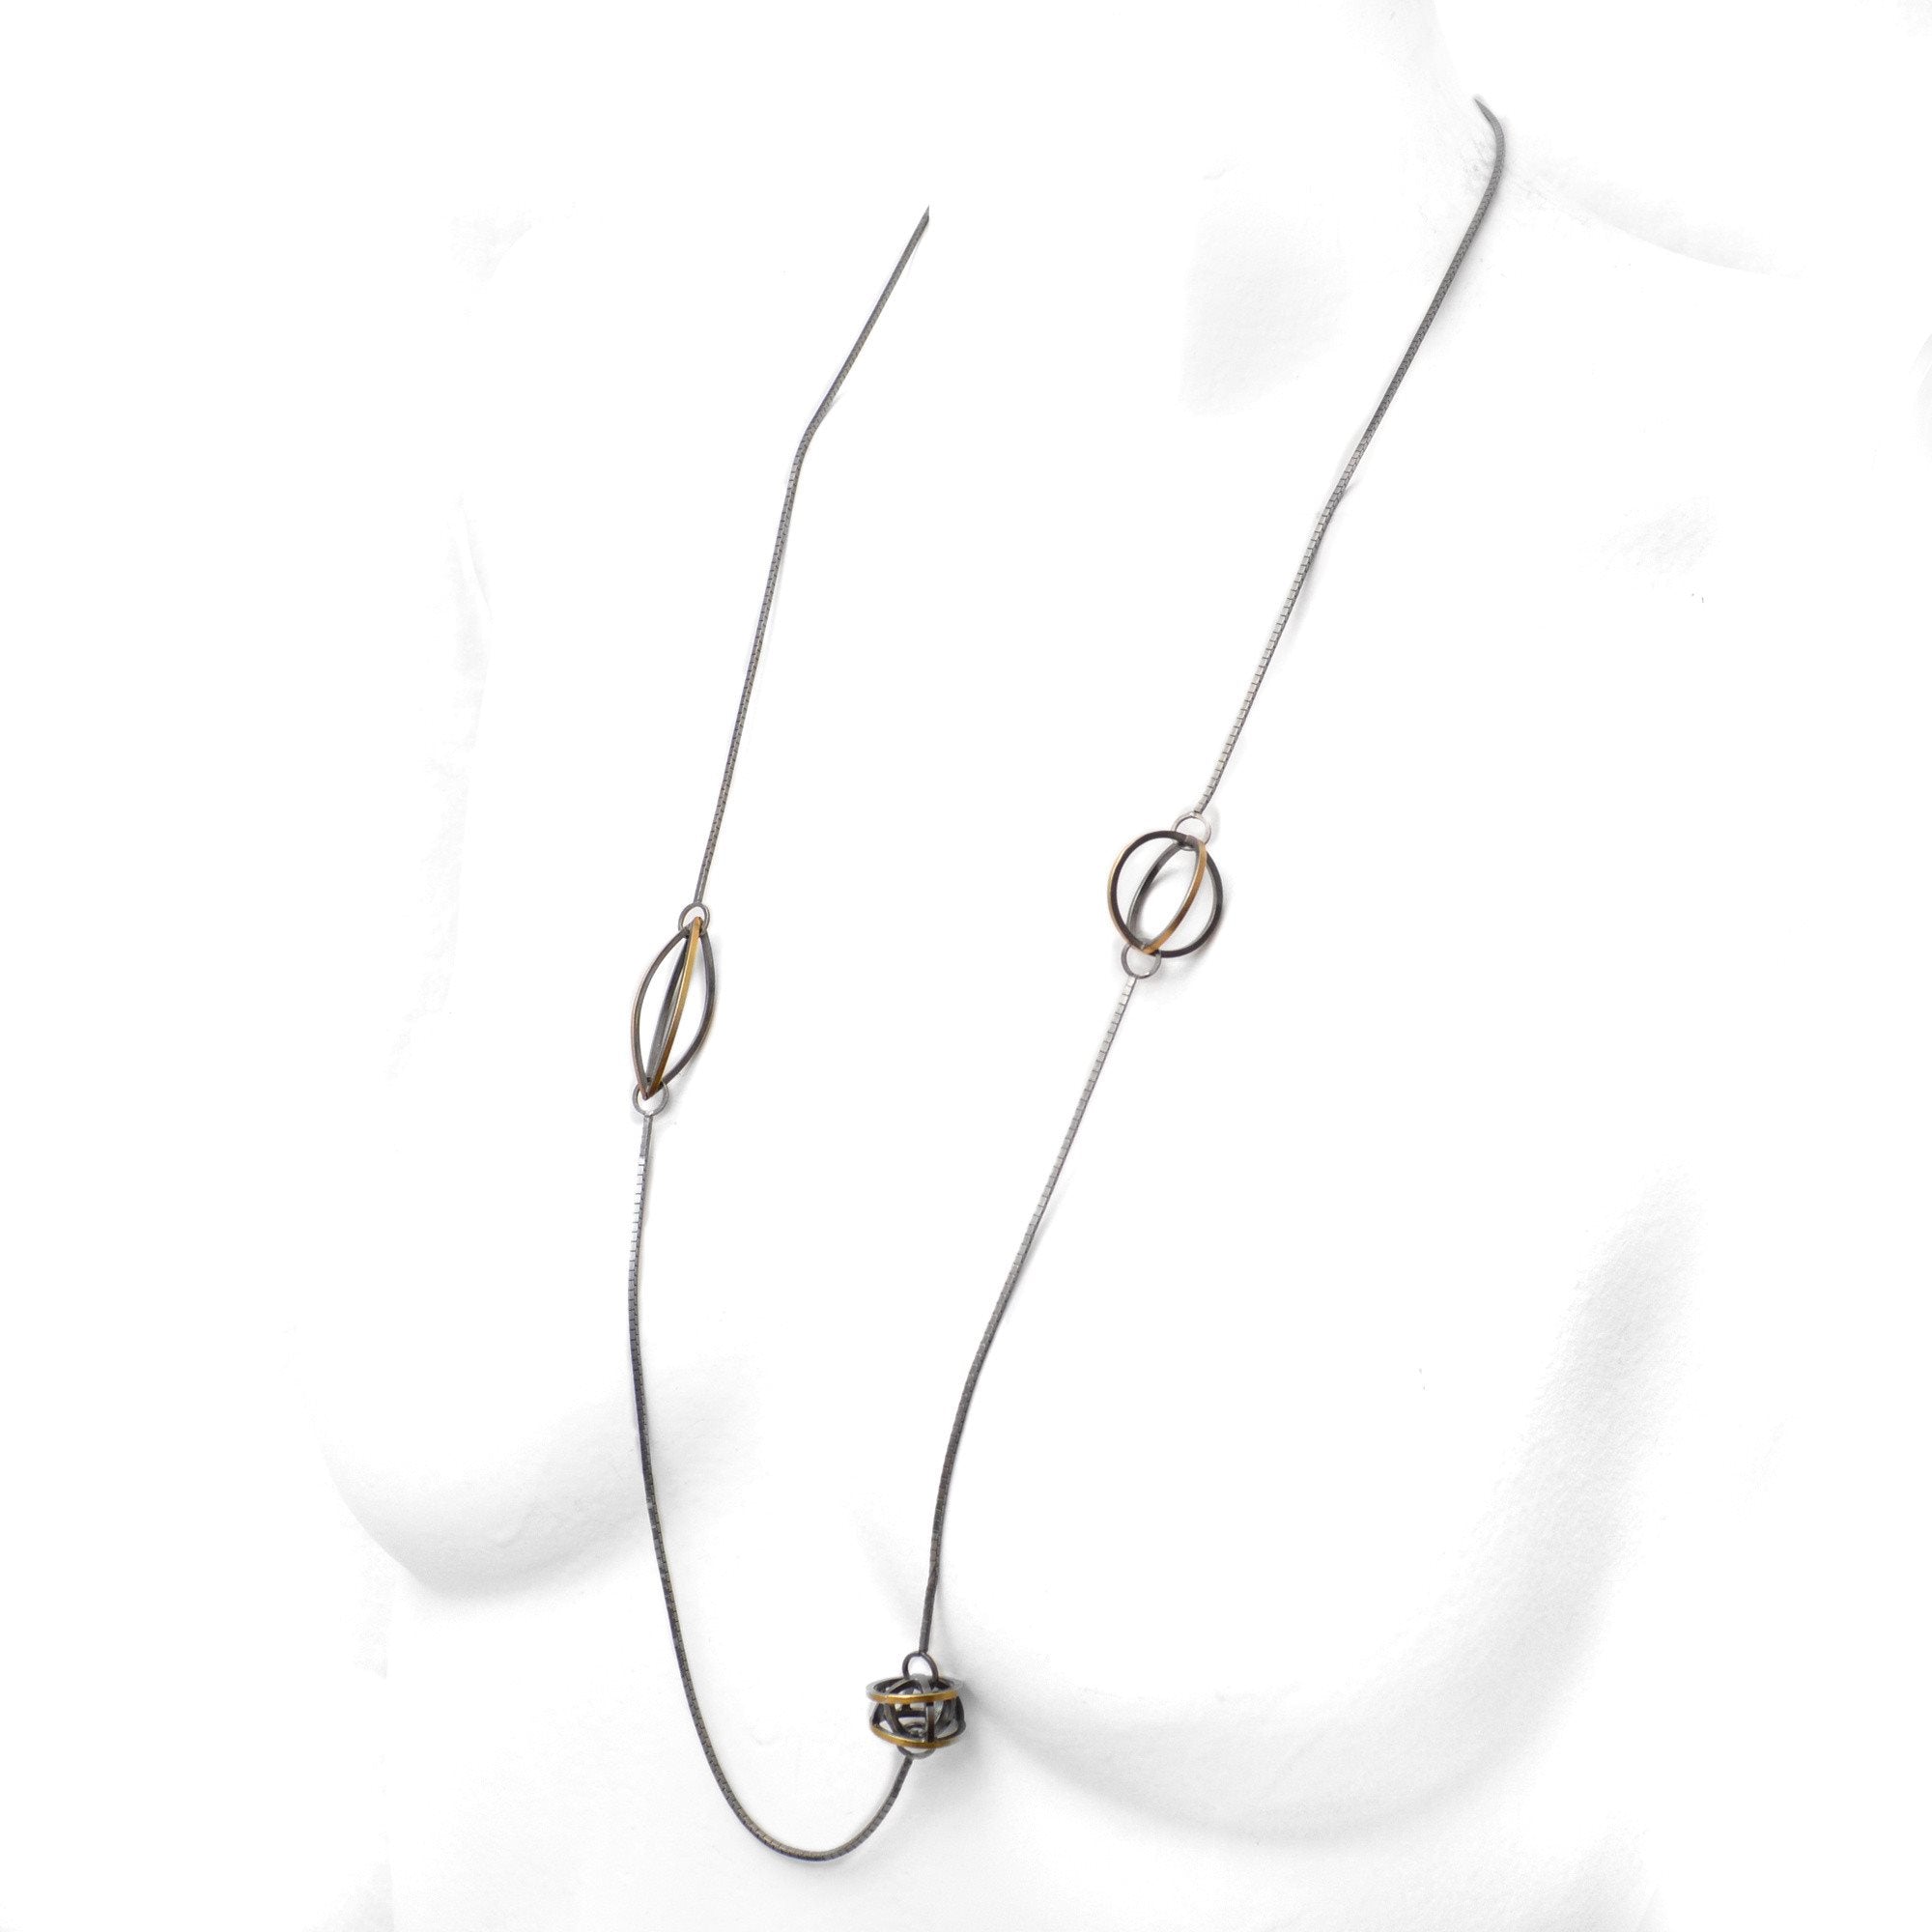 Lattis Long Necklace in Sterling Silver, 22k Gold and Black Patina for Contrast